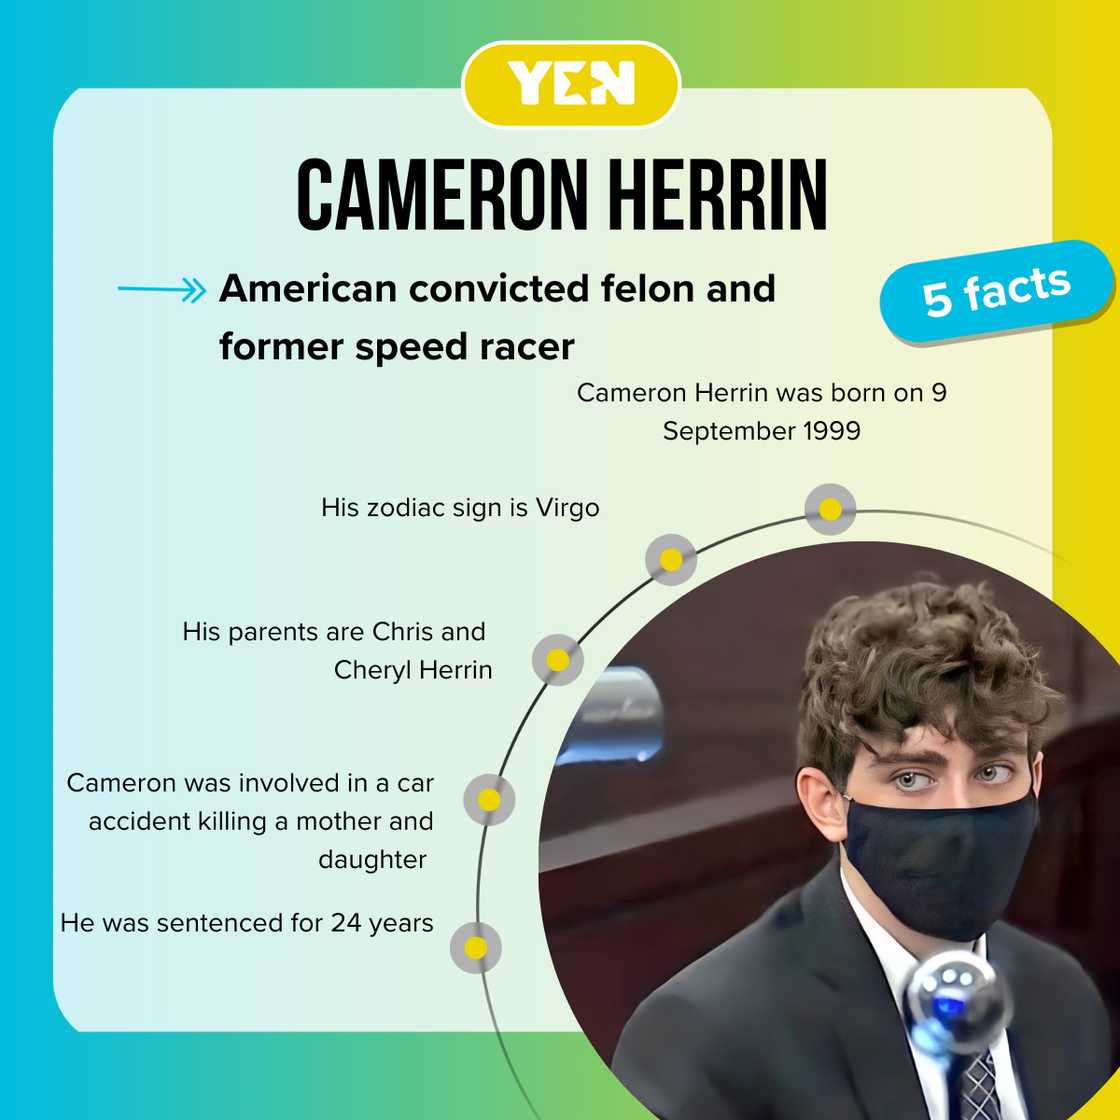 Facts about Cameron Herrin